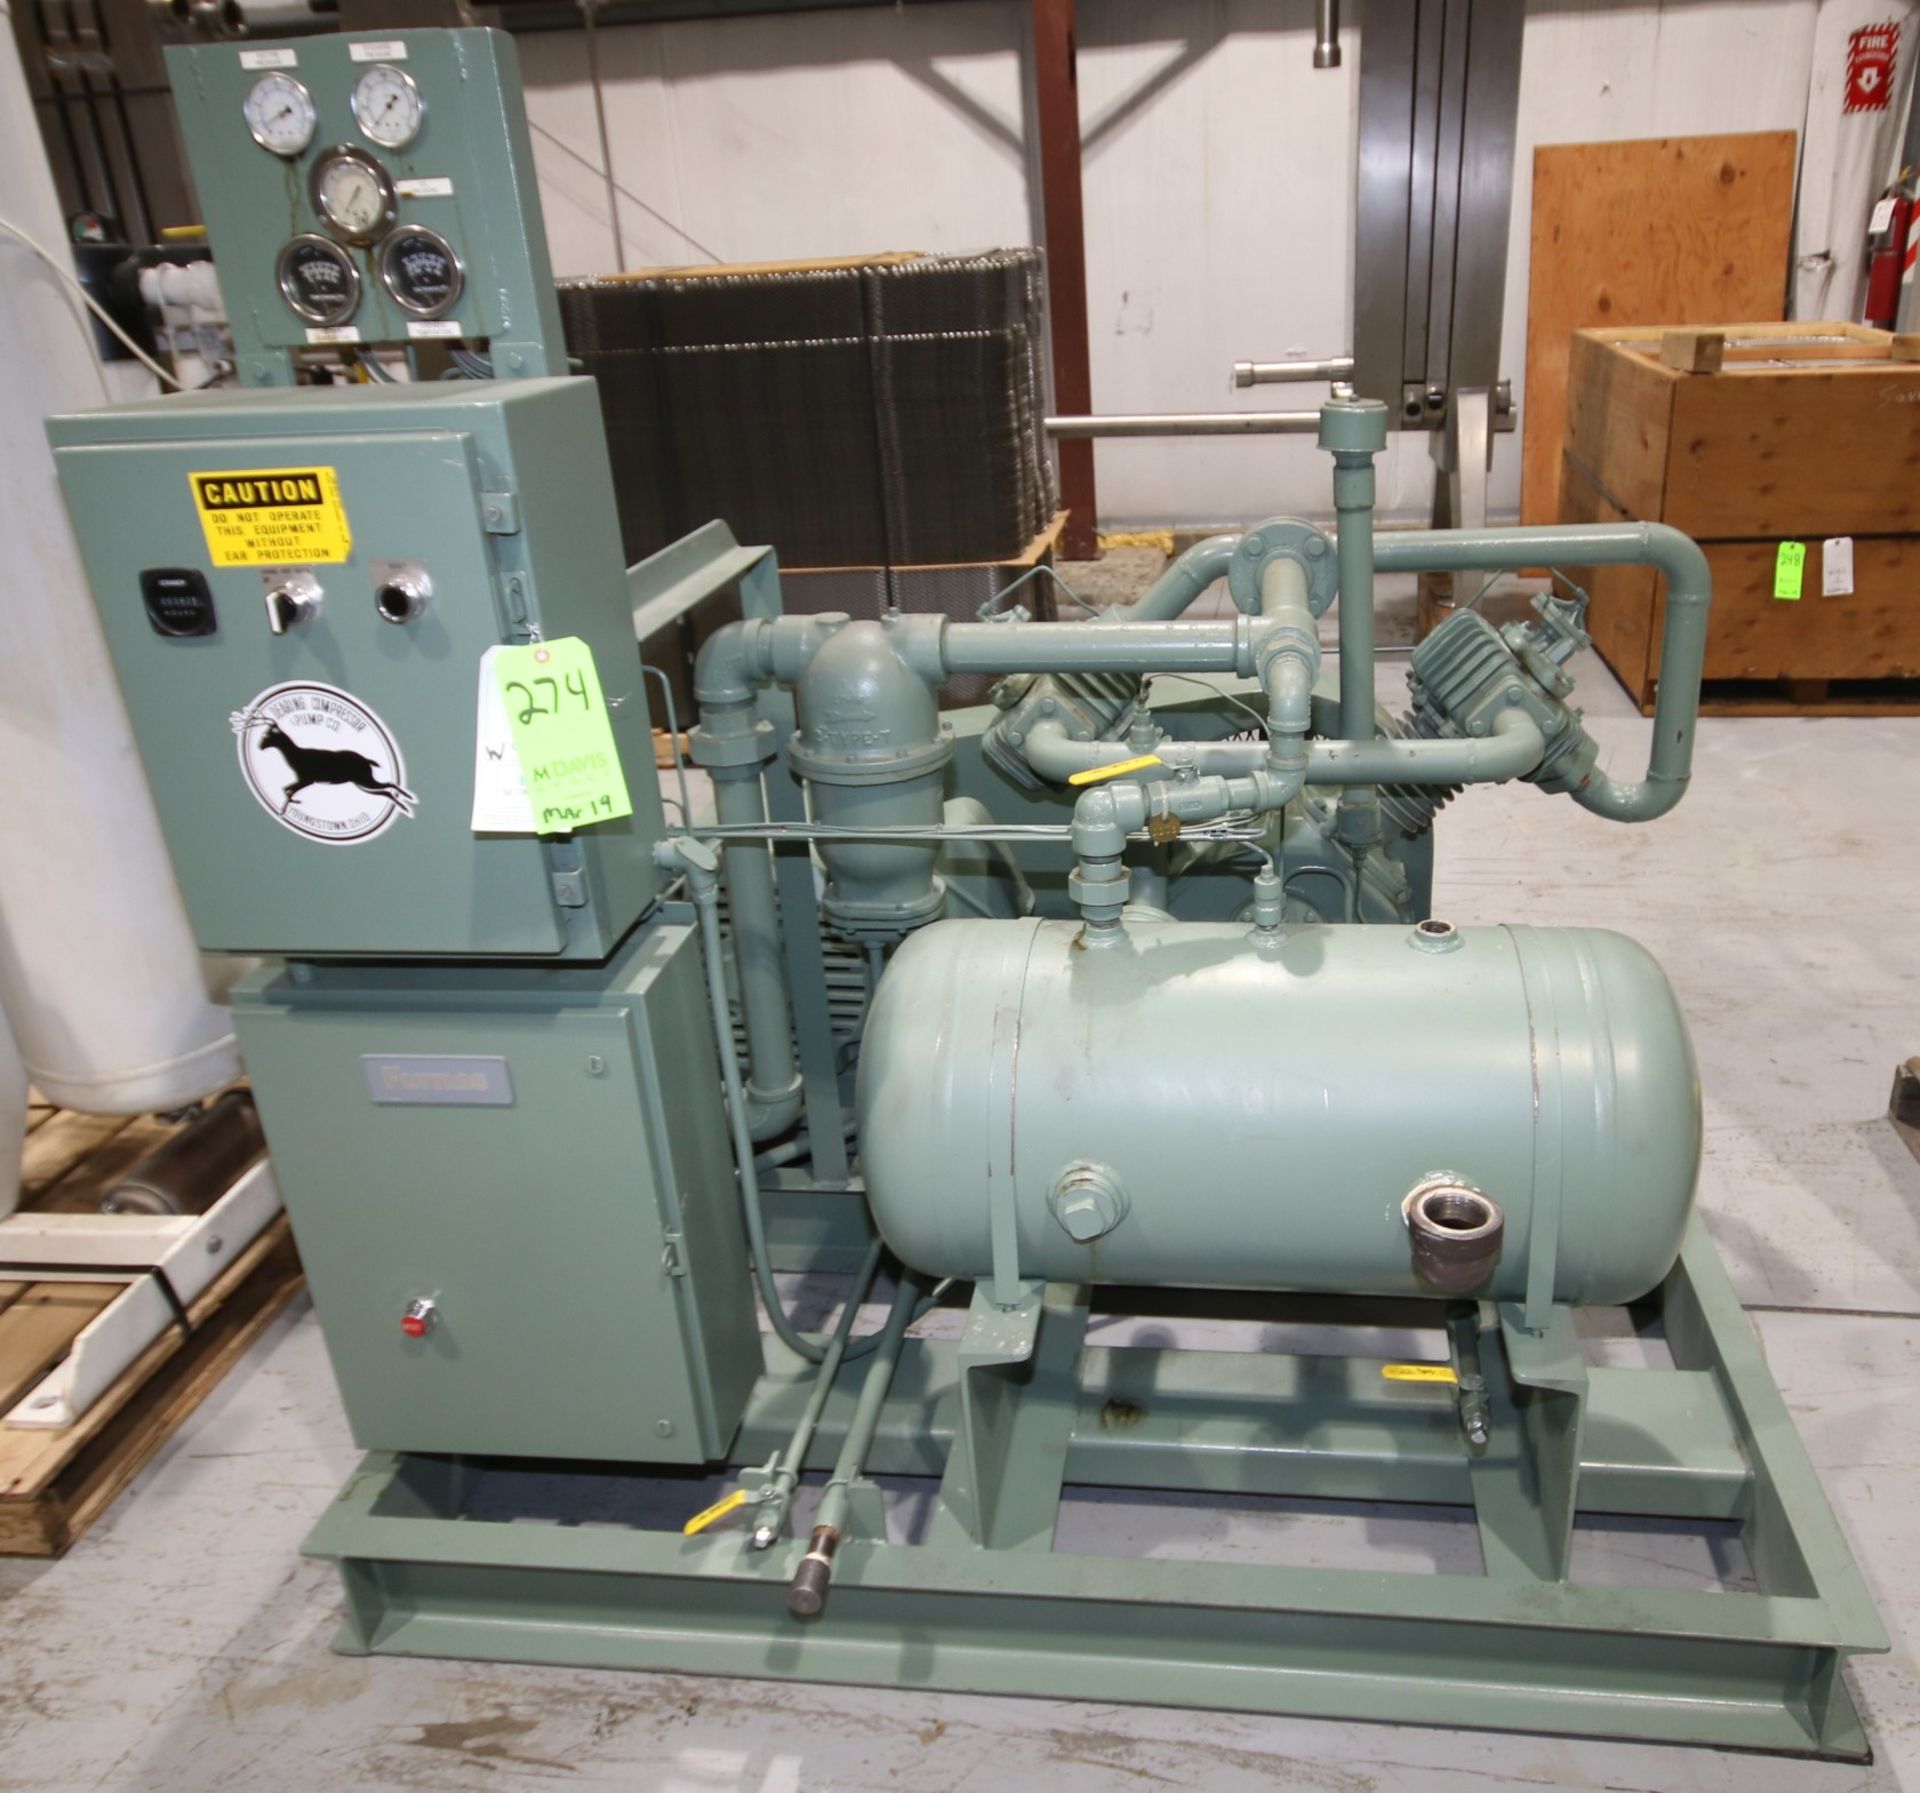 Dearing Compressor & Pump Company 40 hp Reciprocating Air Compressor, with Creole 2 Cylinder